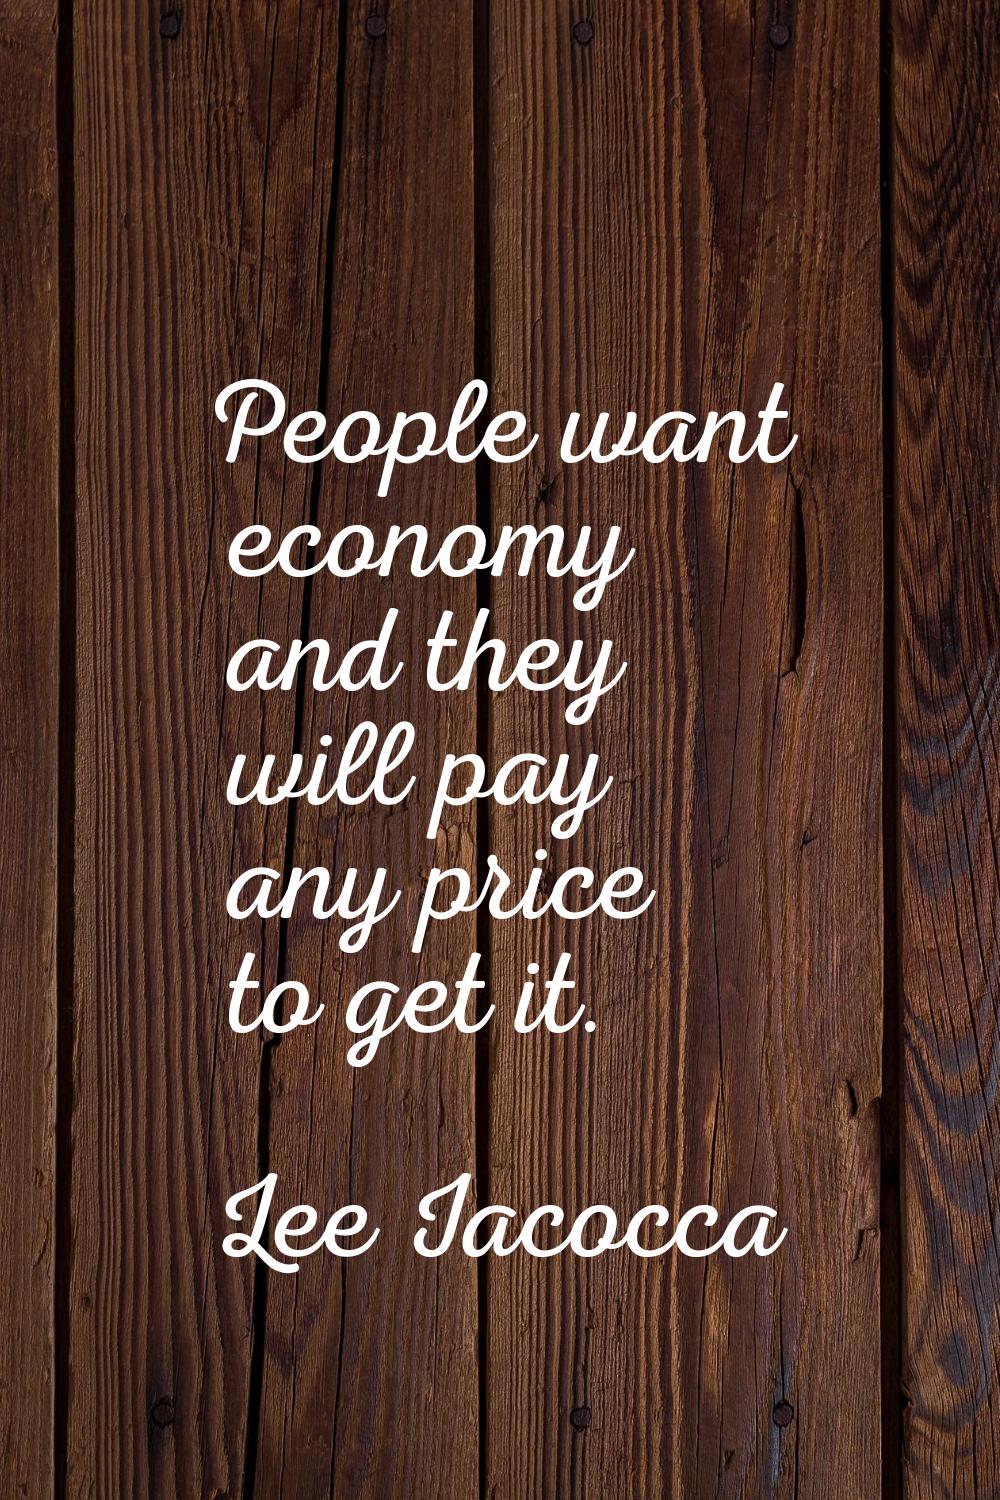 People want economy and they will pay any price to get it.